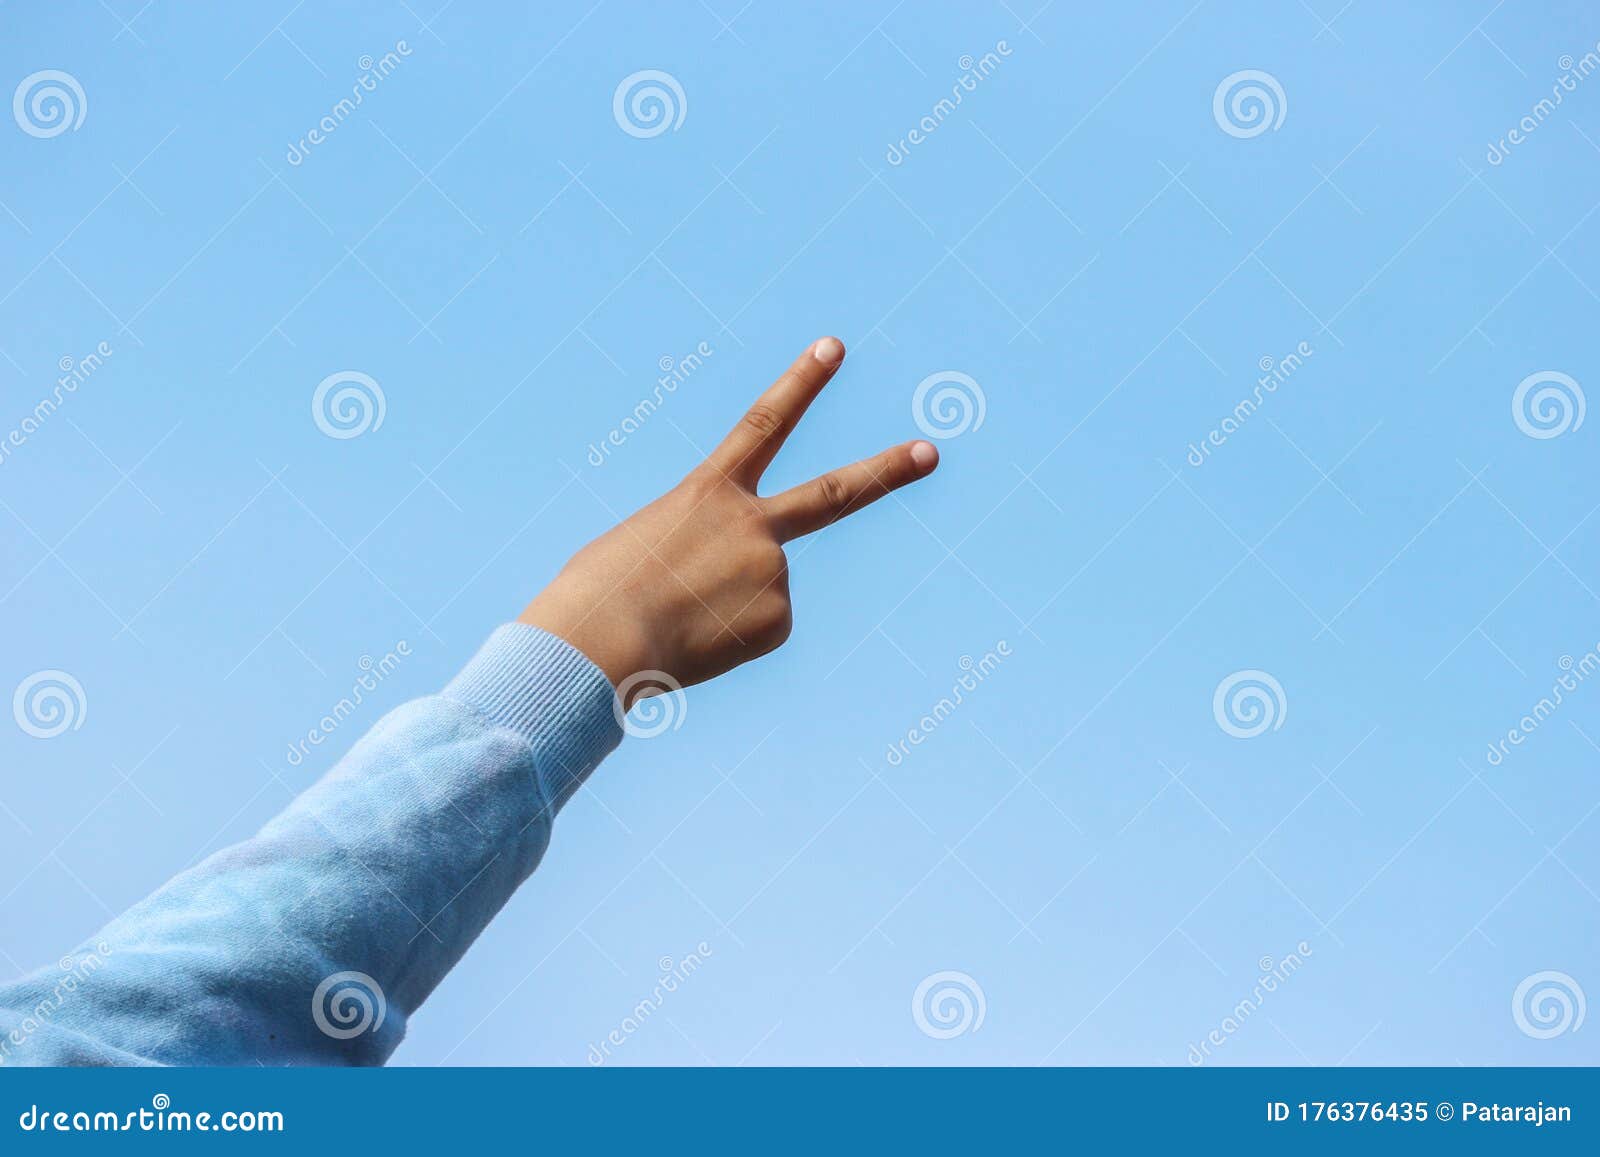 Backside of a Victory Sign from a Young Girl Hand with Blue Sky As  Background. Stock Image - Image of background, language: 176376435